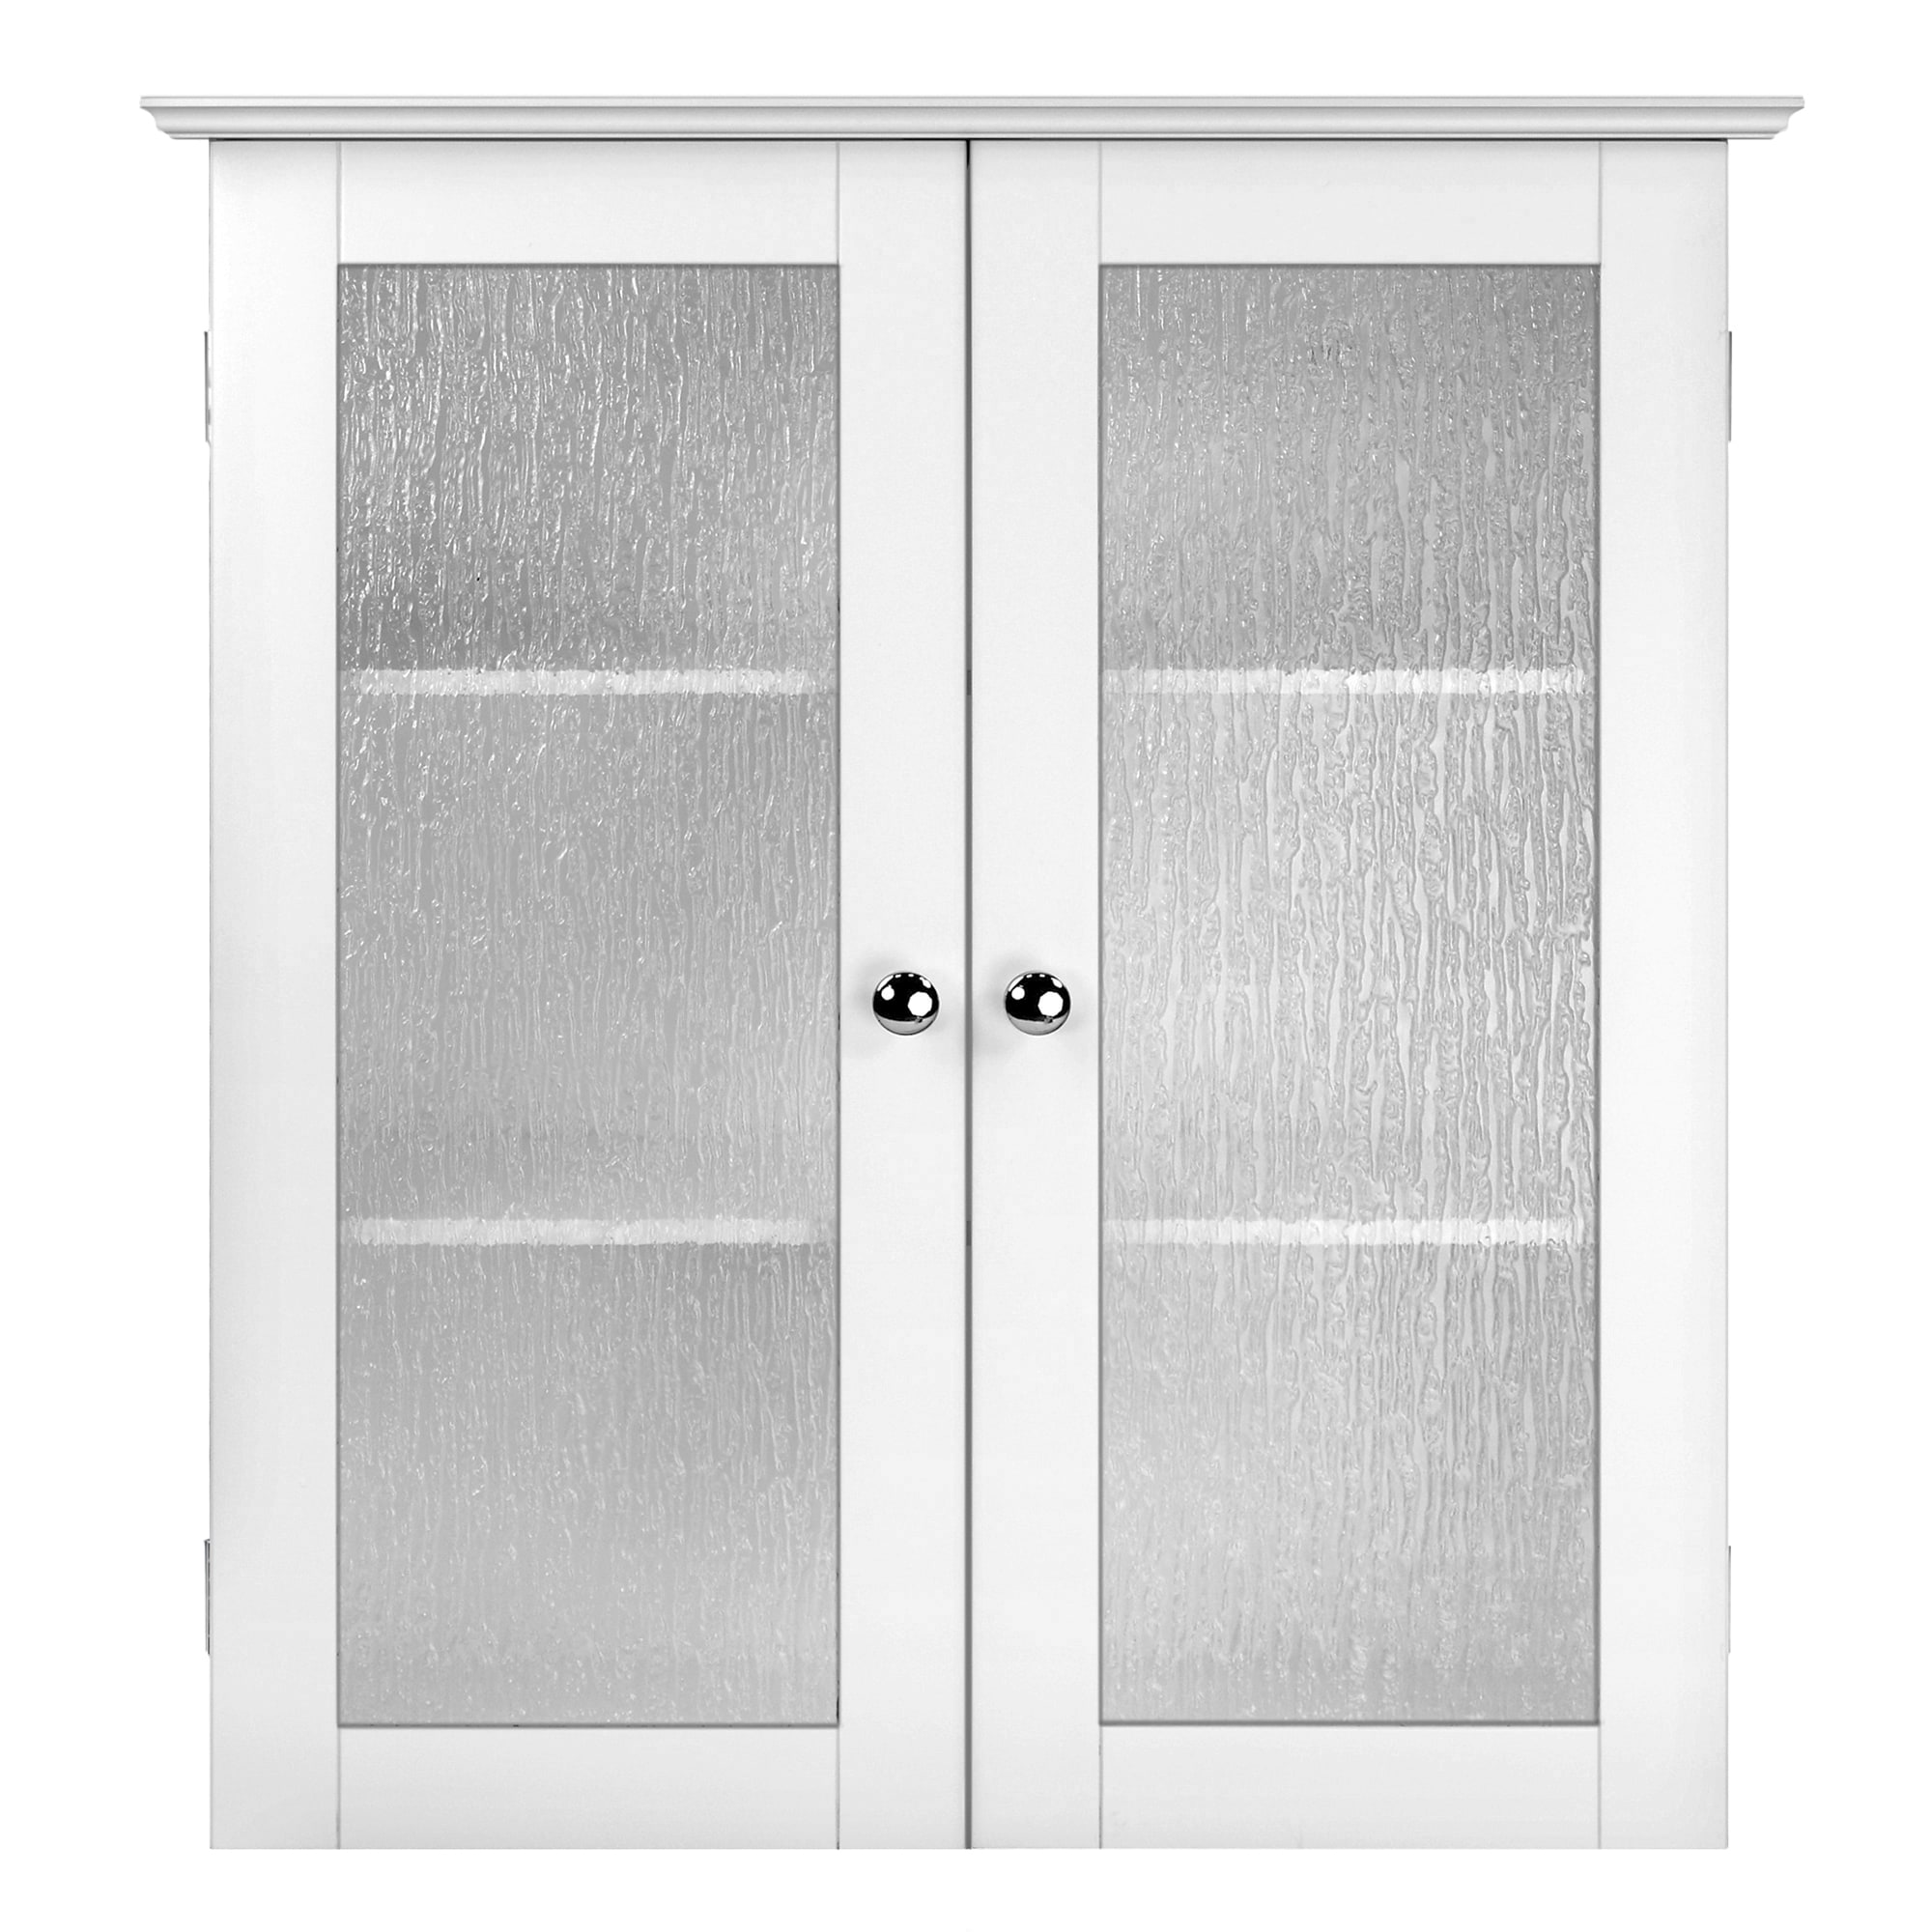 Teamson Home Connor 22.25-in W x 25-in H x 8-in D White Bathroom Wall Cabinet